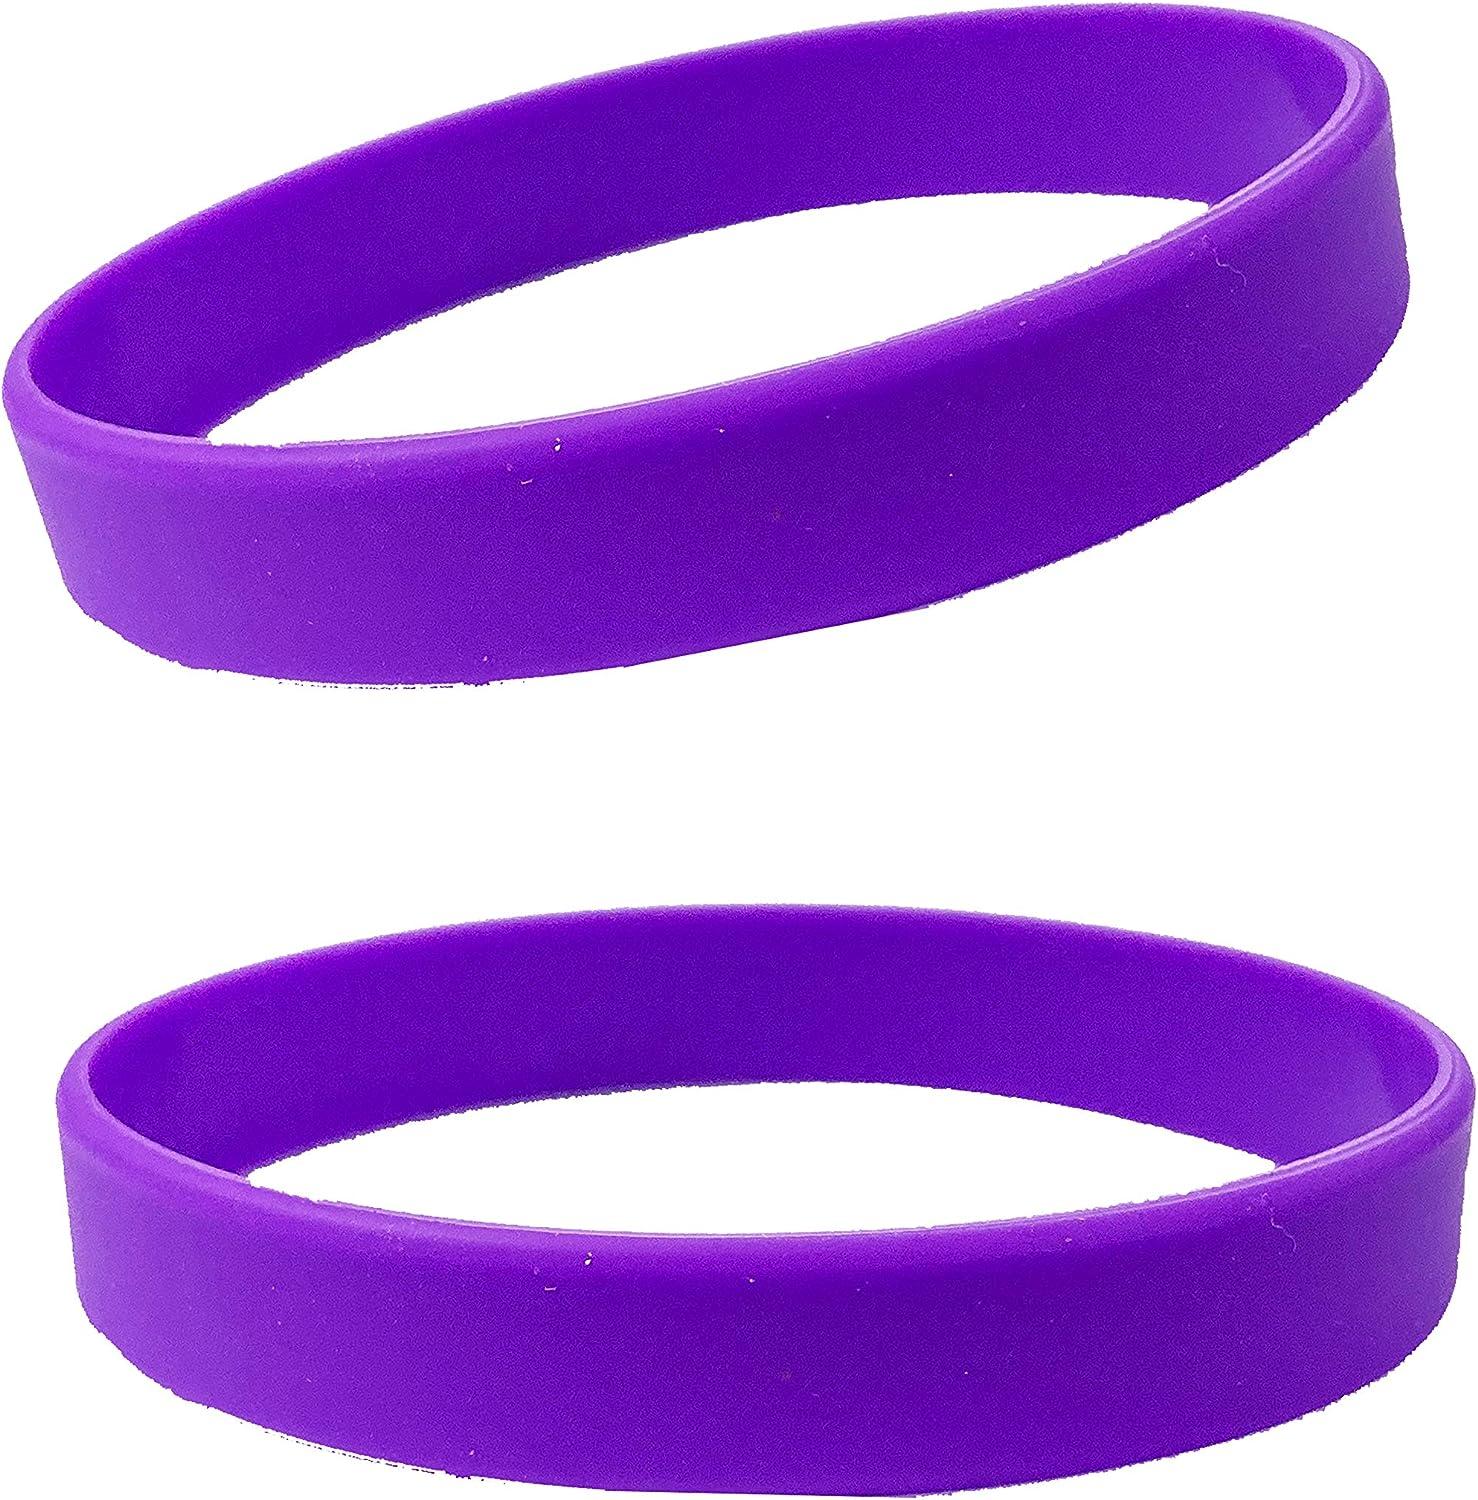 Customized Silicone Wristband | Top Silicone Manufacturer - 30+ Years  Experience | Jan Huei